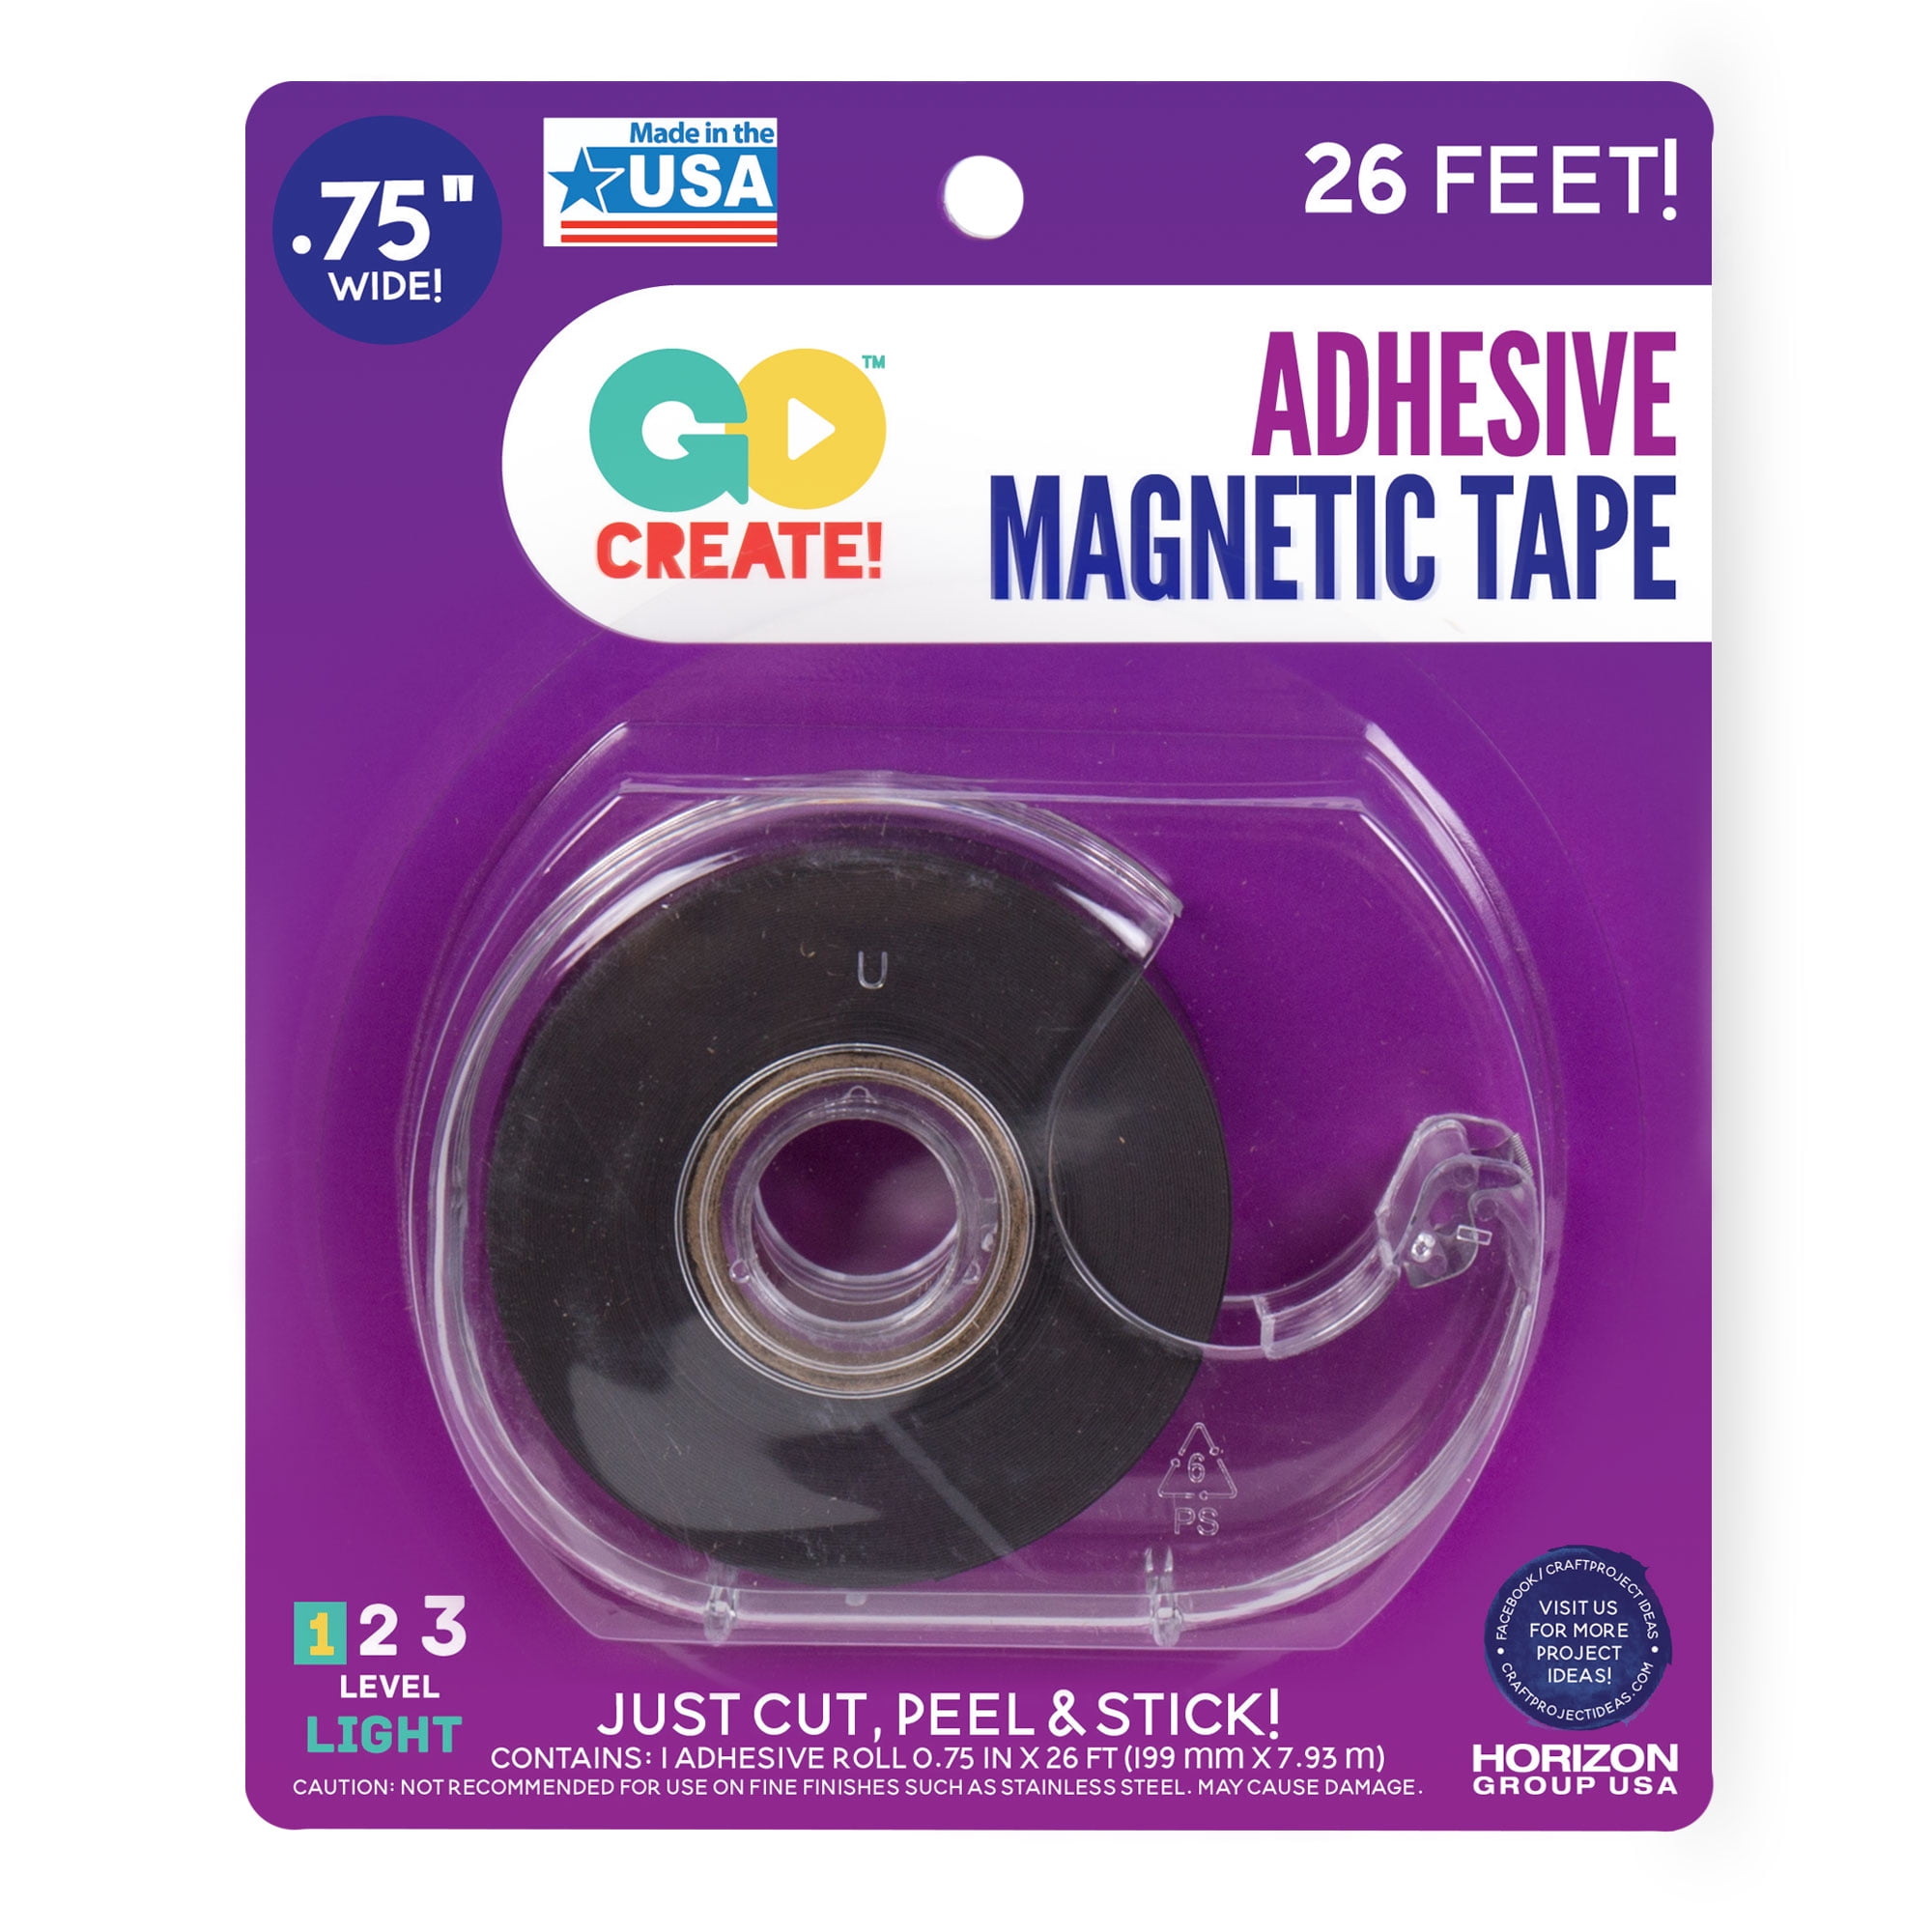 Go Create Magnetic Tape Dispenser, Adhesive Magnetic Tape Roll 26 ft. x .75" Wide